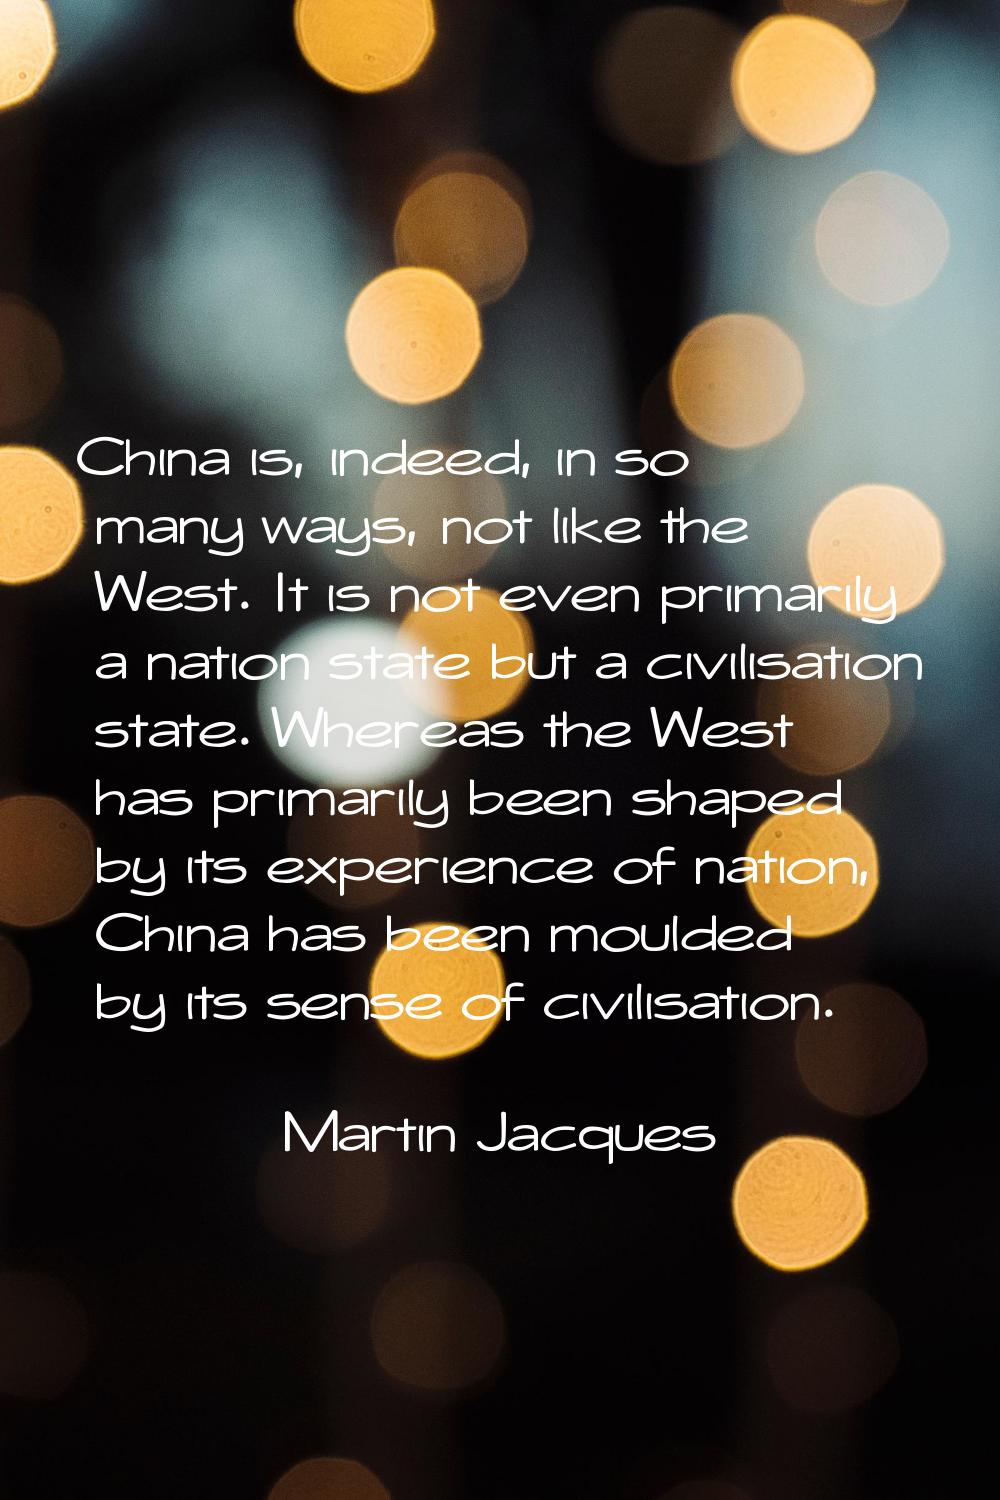 China is, indeed, in so many ways, not like the West. It is not even primarily a nation state but a